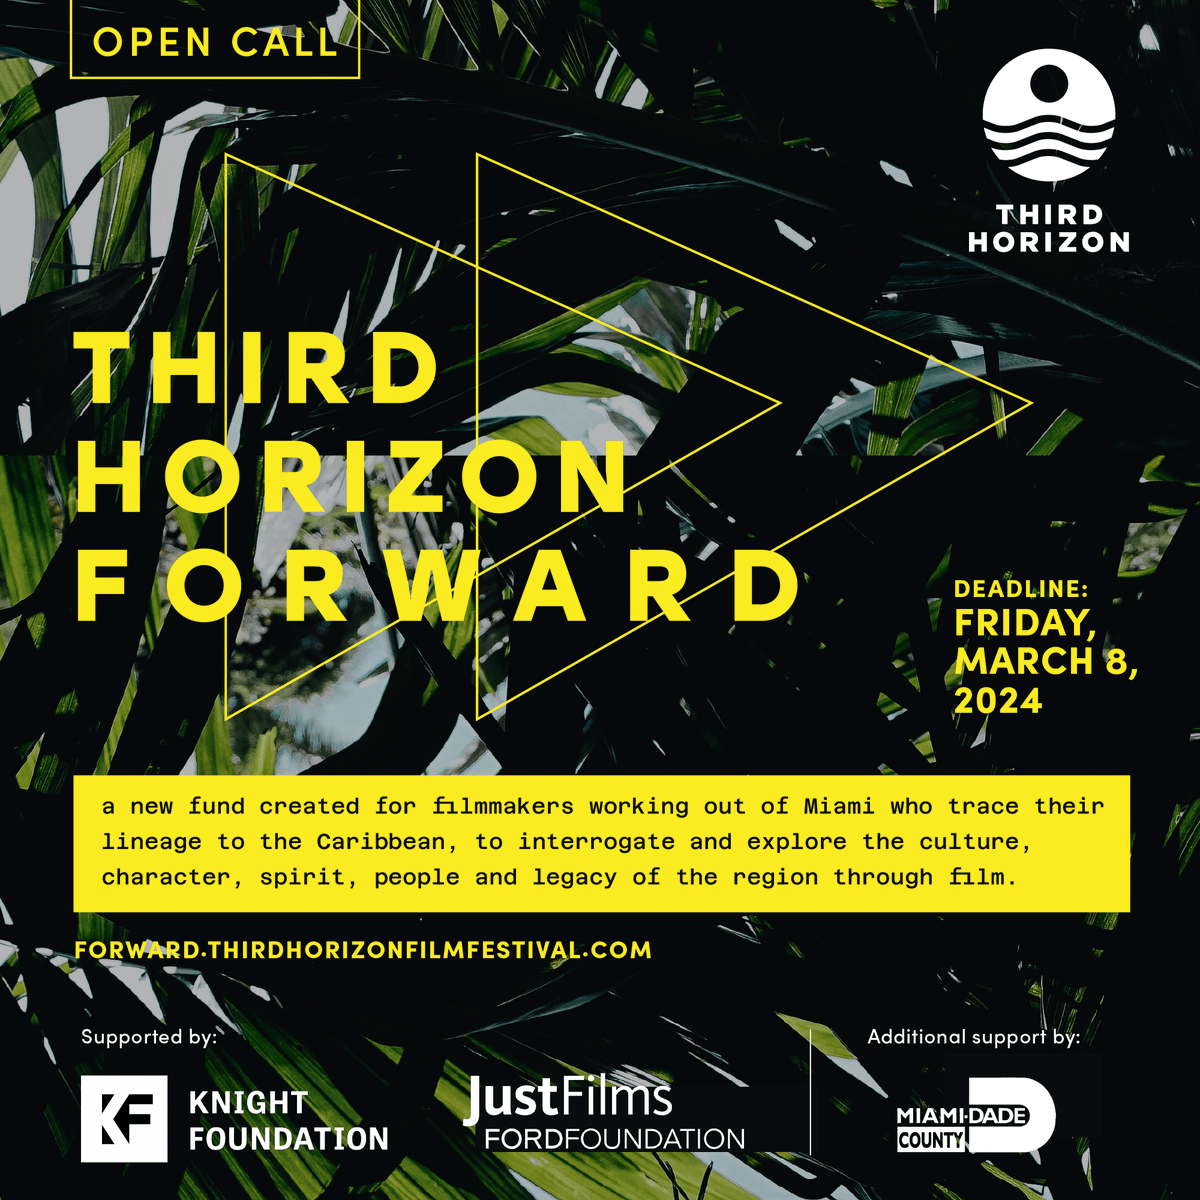 🗣️ Opportunity Alert: We’re excited to announce our Open Call for Third Horizon Forward, a fund created for Miami-based filmmakers who trace their lineage to the Caribbean, to interrogate & explore the culture, spirit & legacy of the region. Learn more: forward.thirdhorizonfilmfestival.com